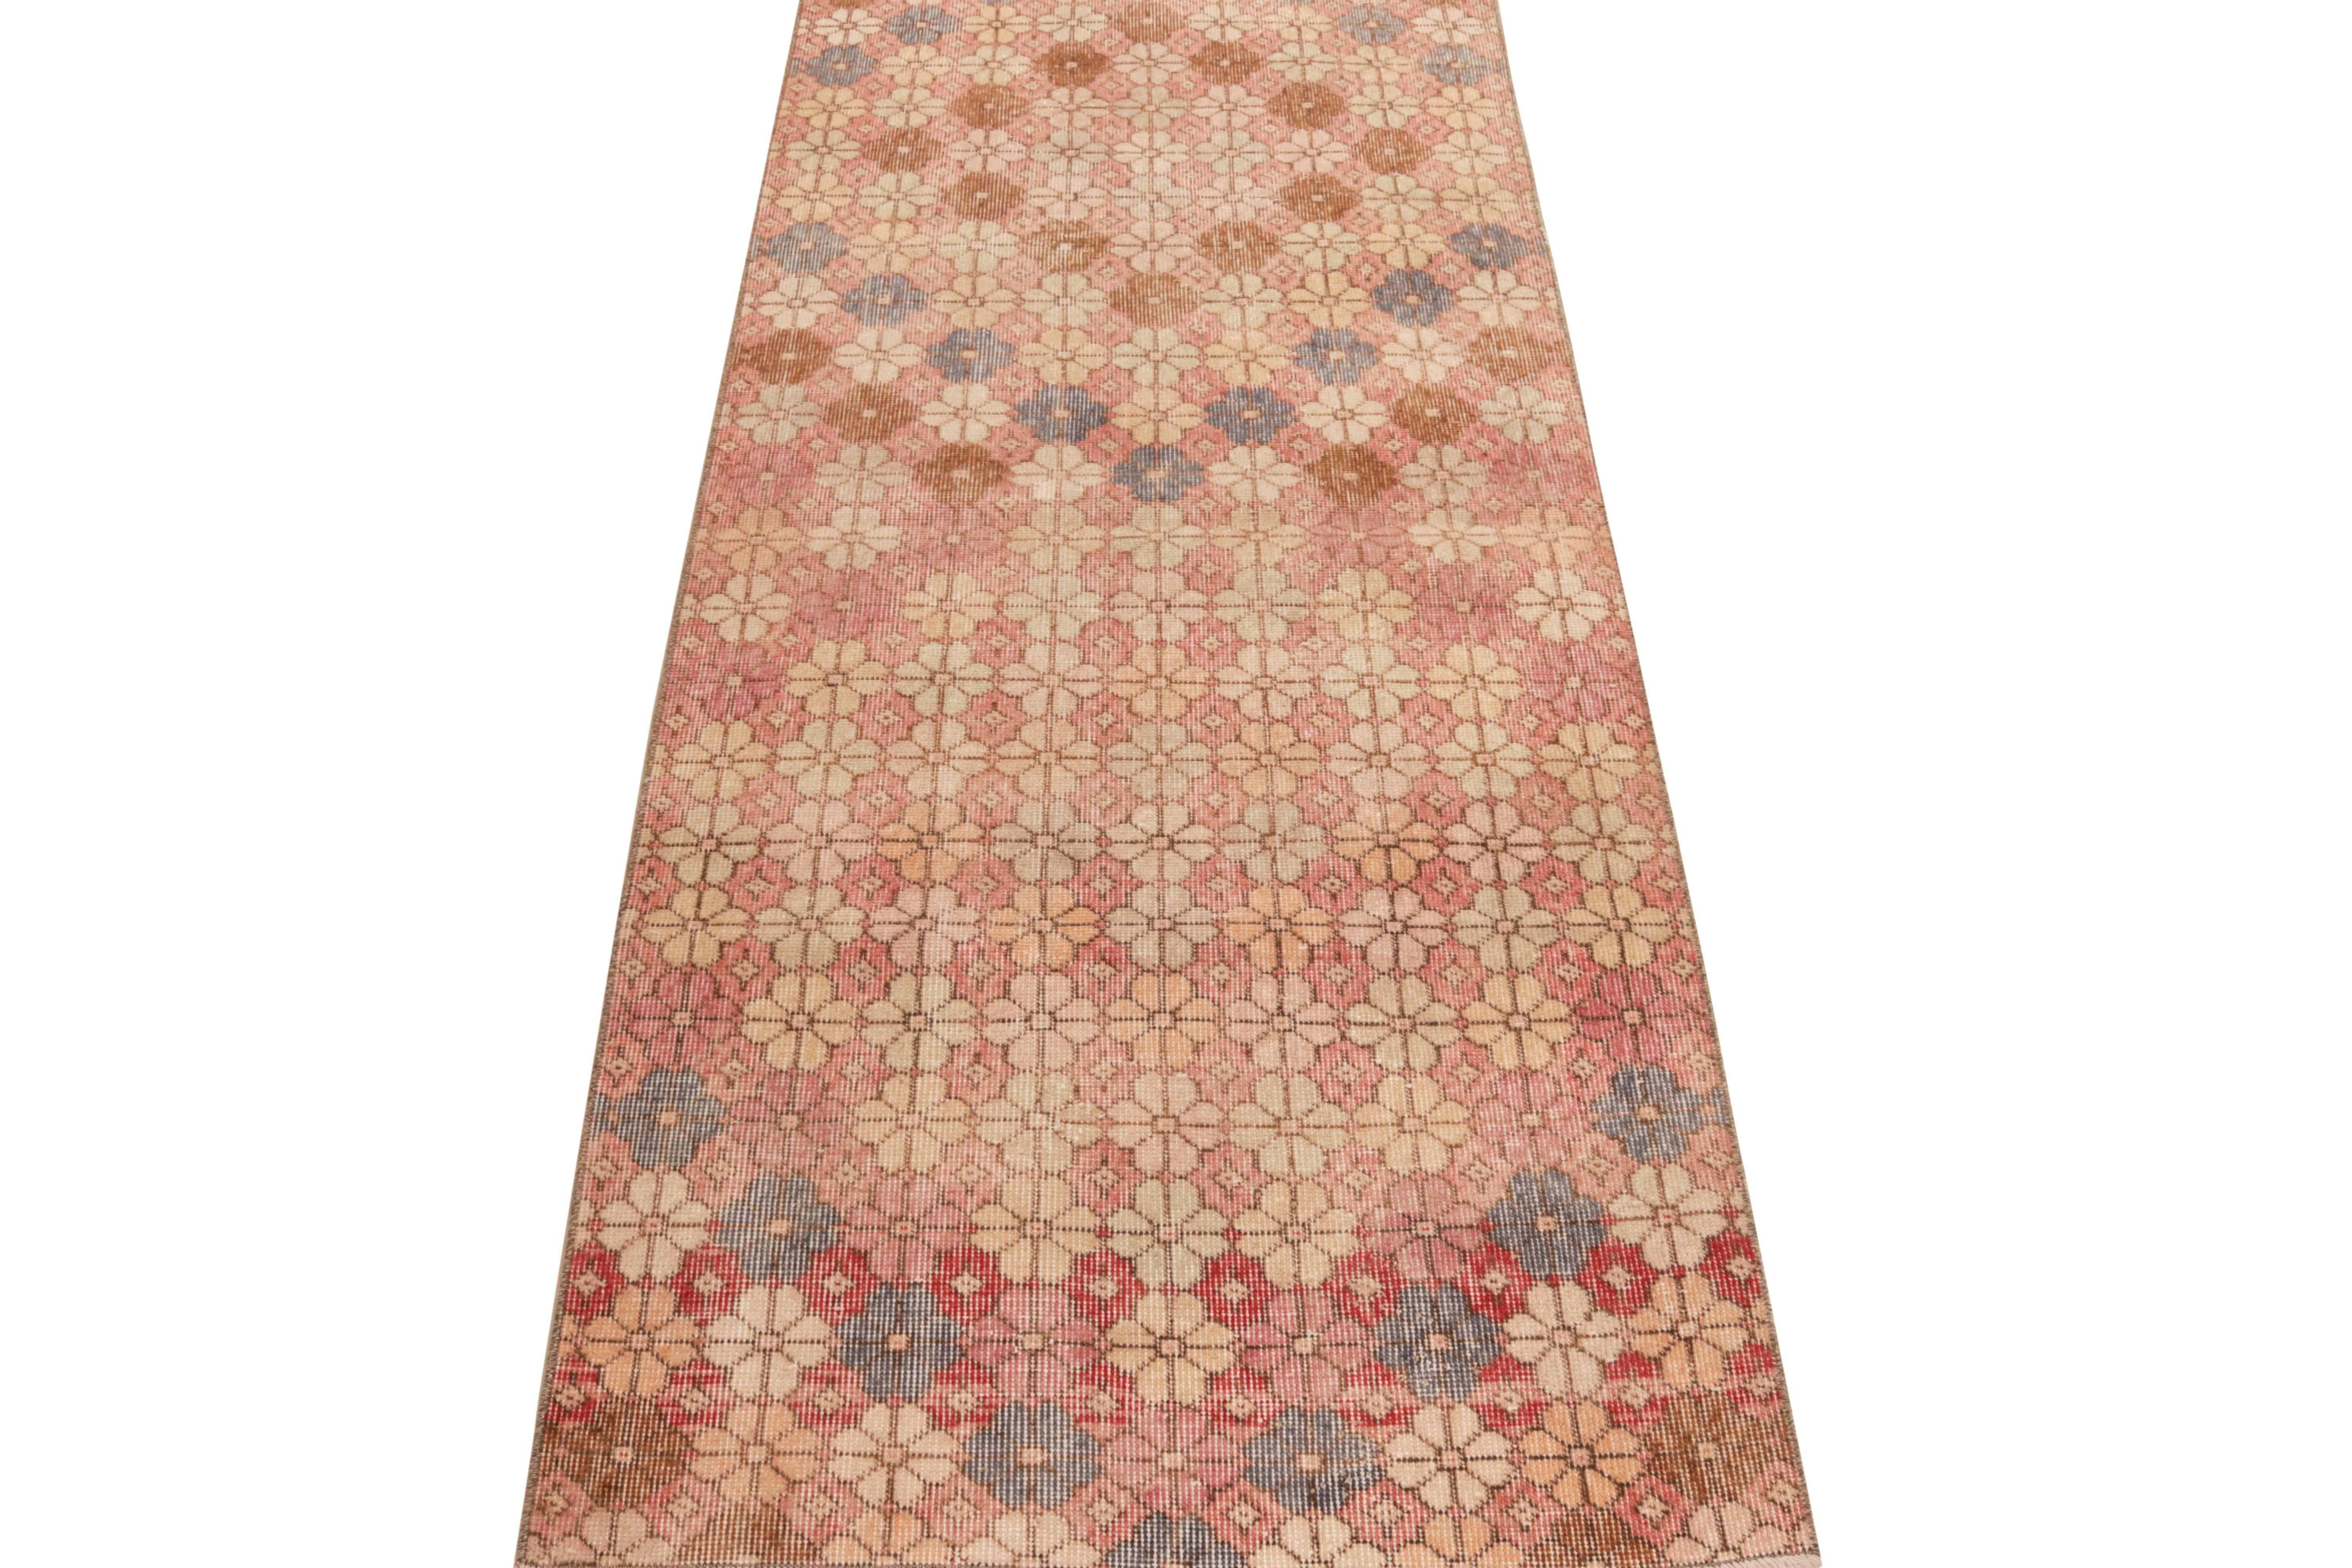 A 3x7 distressed style vintage runner connoting the works of a bold Turkish designer from our commemorative Mid century Pasha collection.

Belonging to the 1960s, the piece reflects the approach of the artist reading fine geometric application